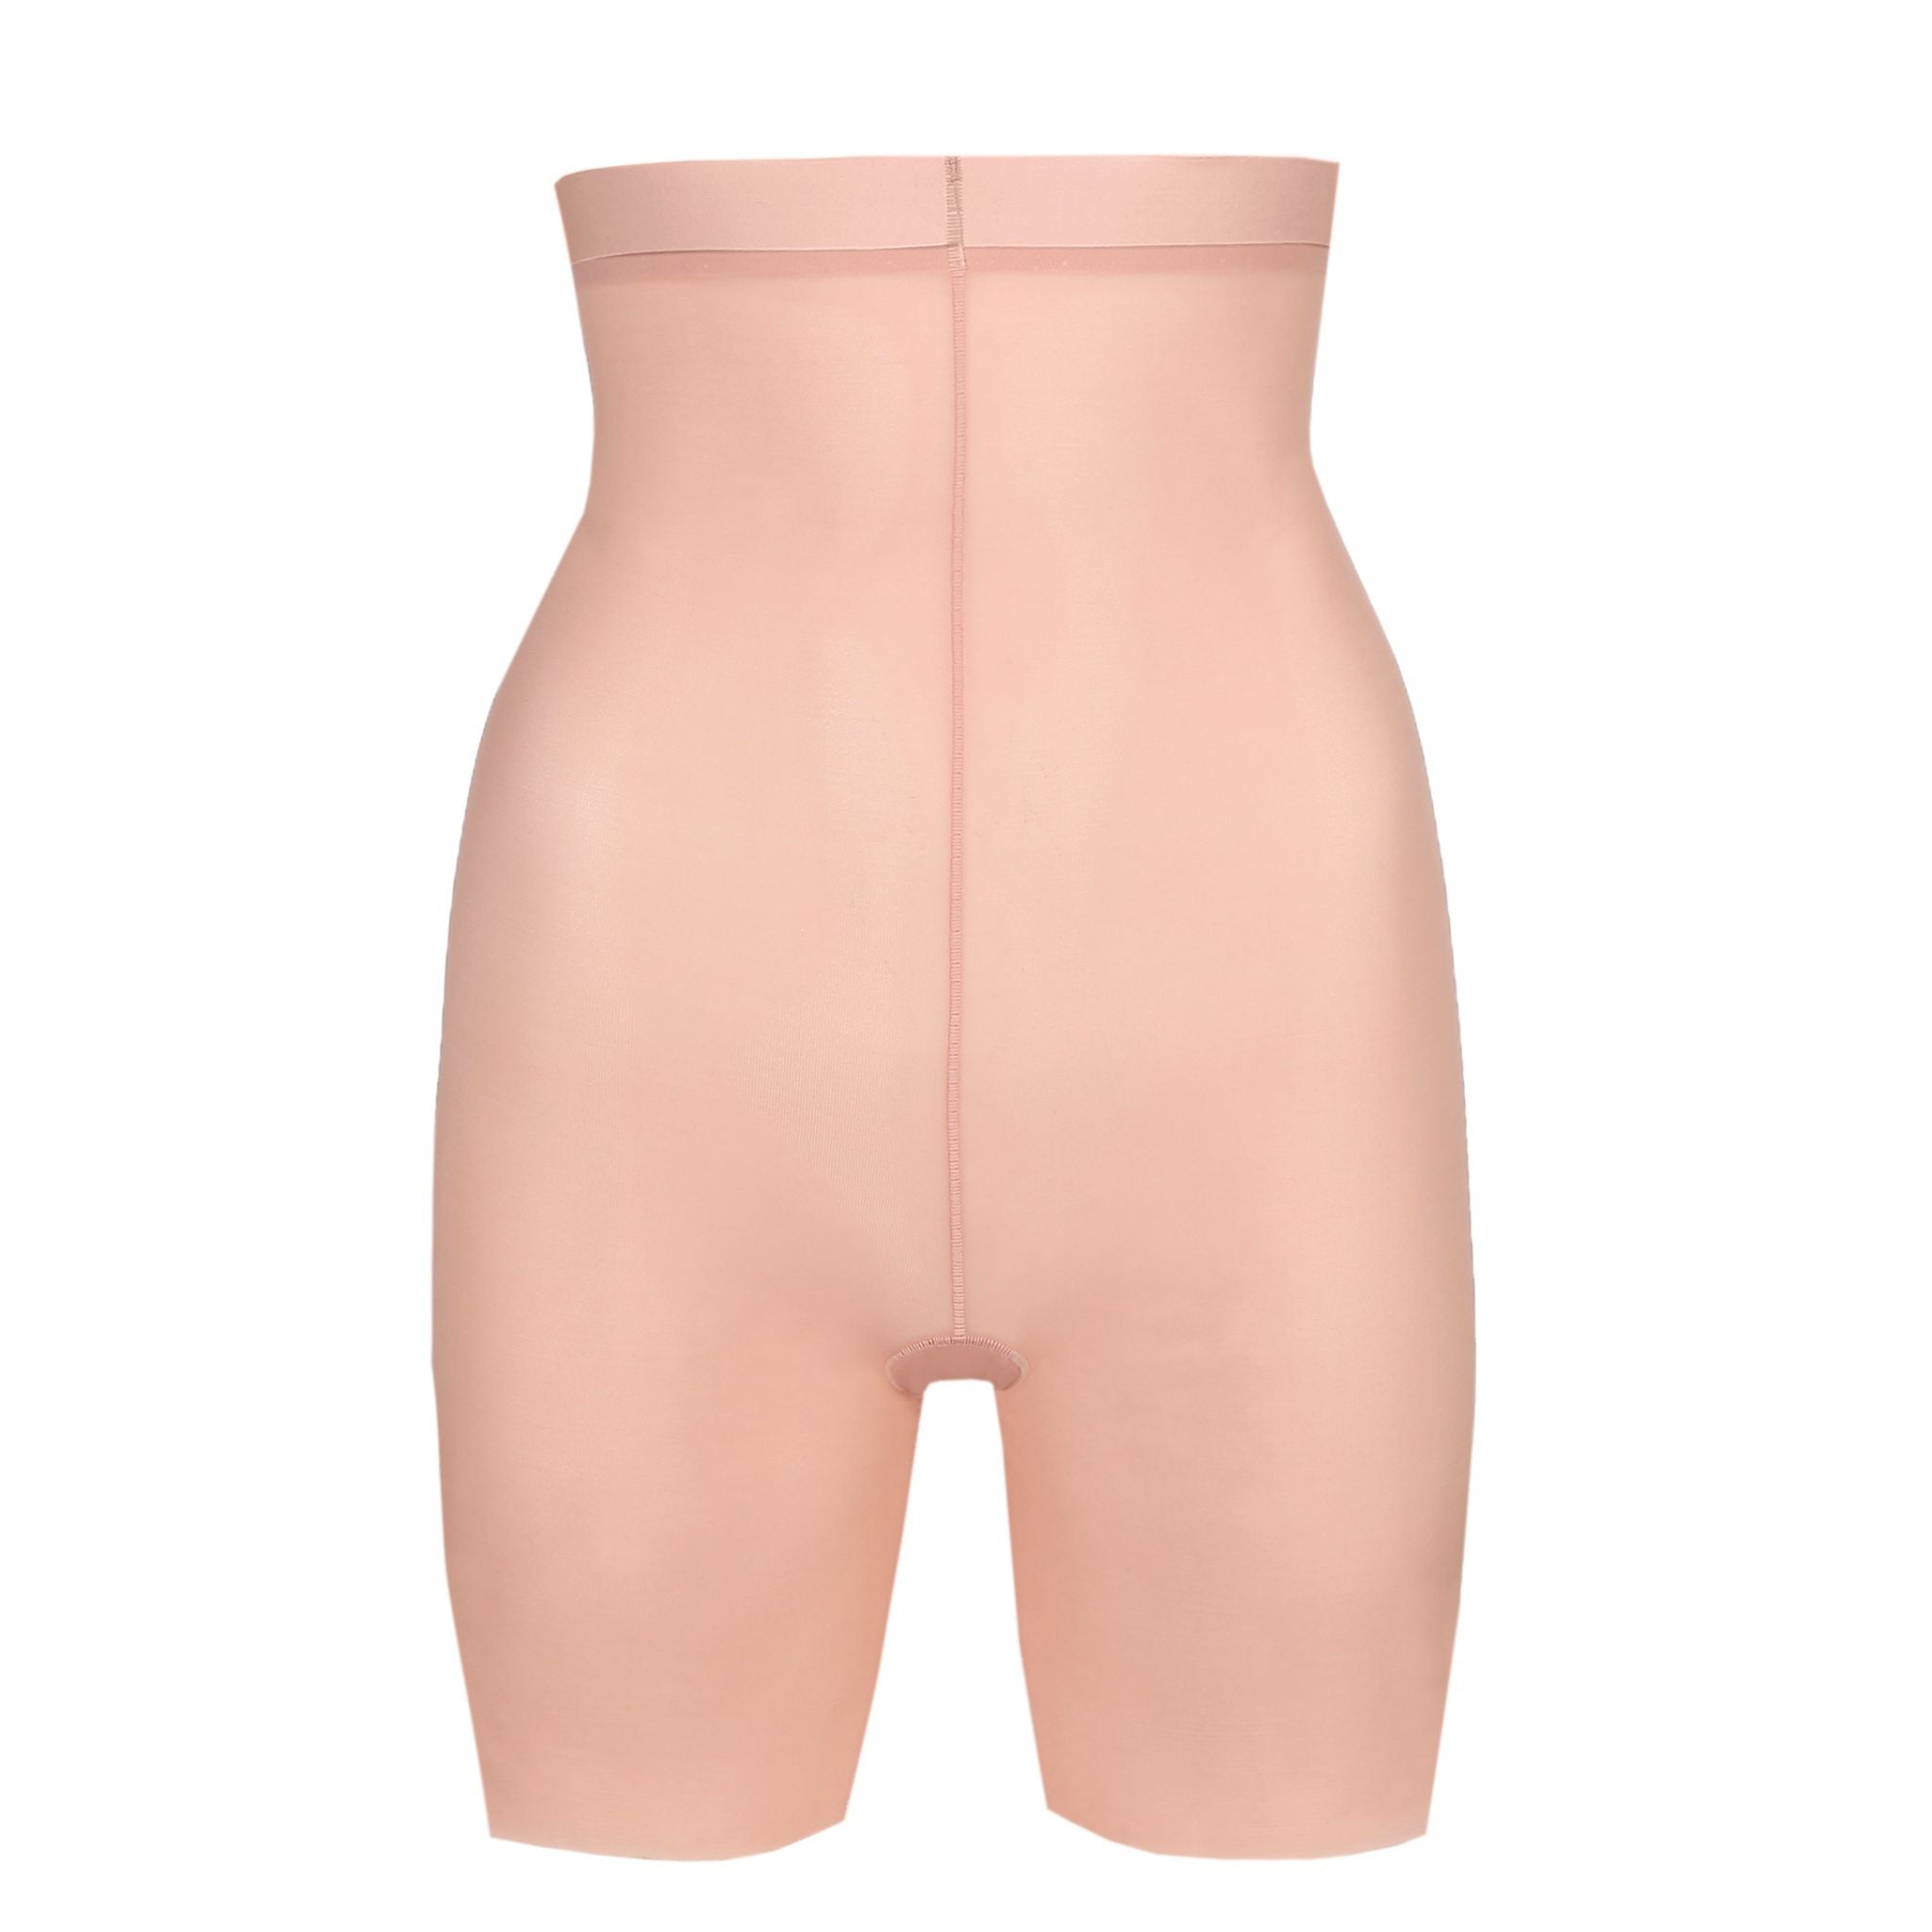 Shaping shorts in a lightweight fabric with a seamless fit. Powder Rose is a soft, feminine neutral.